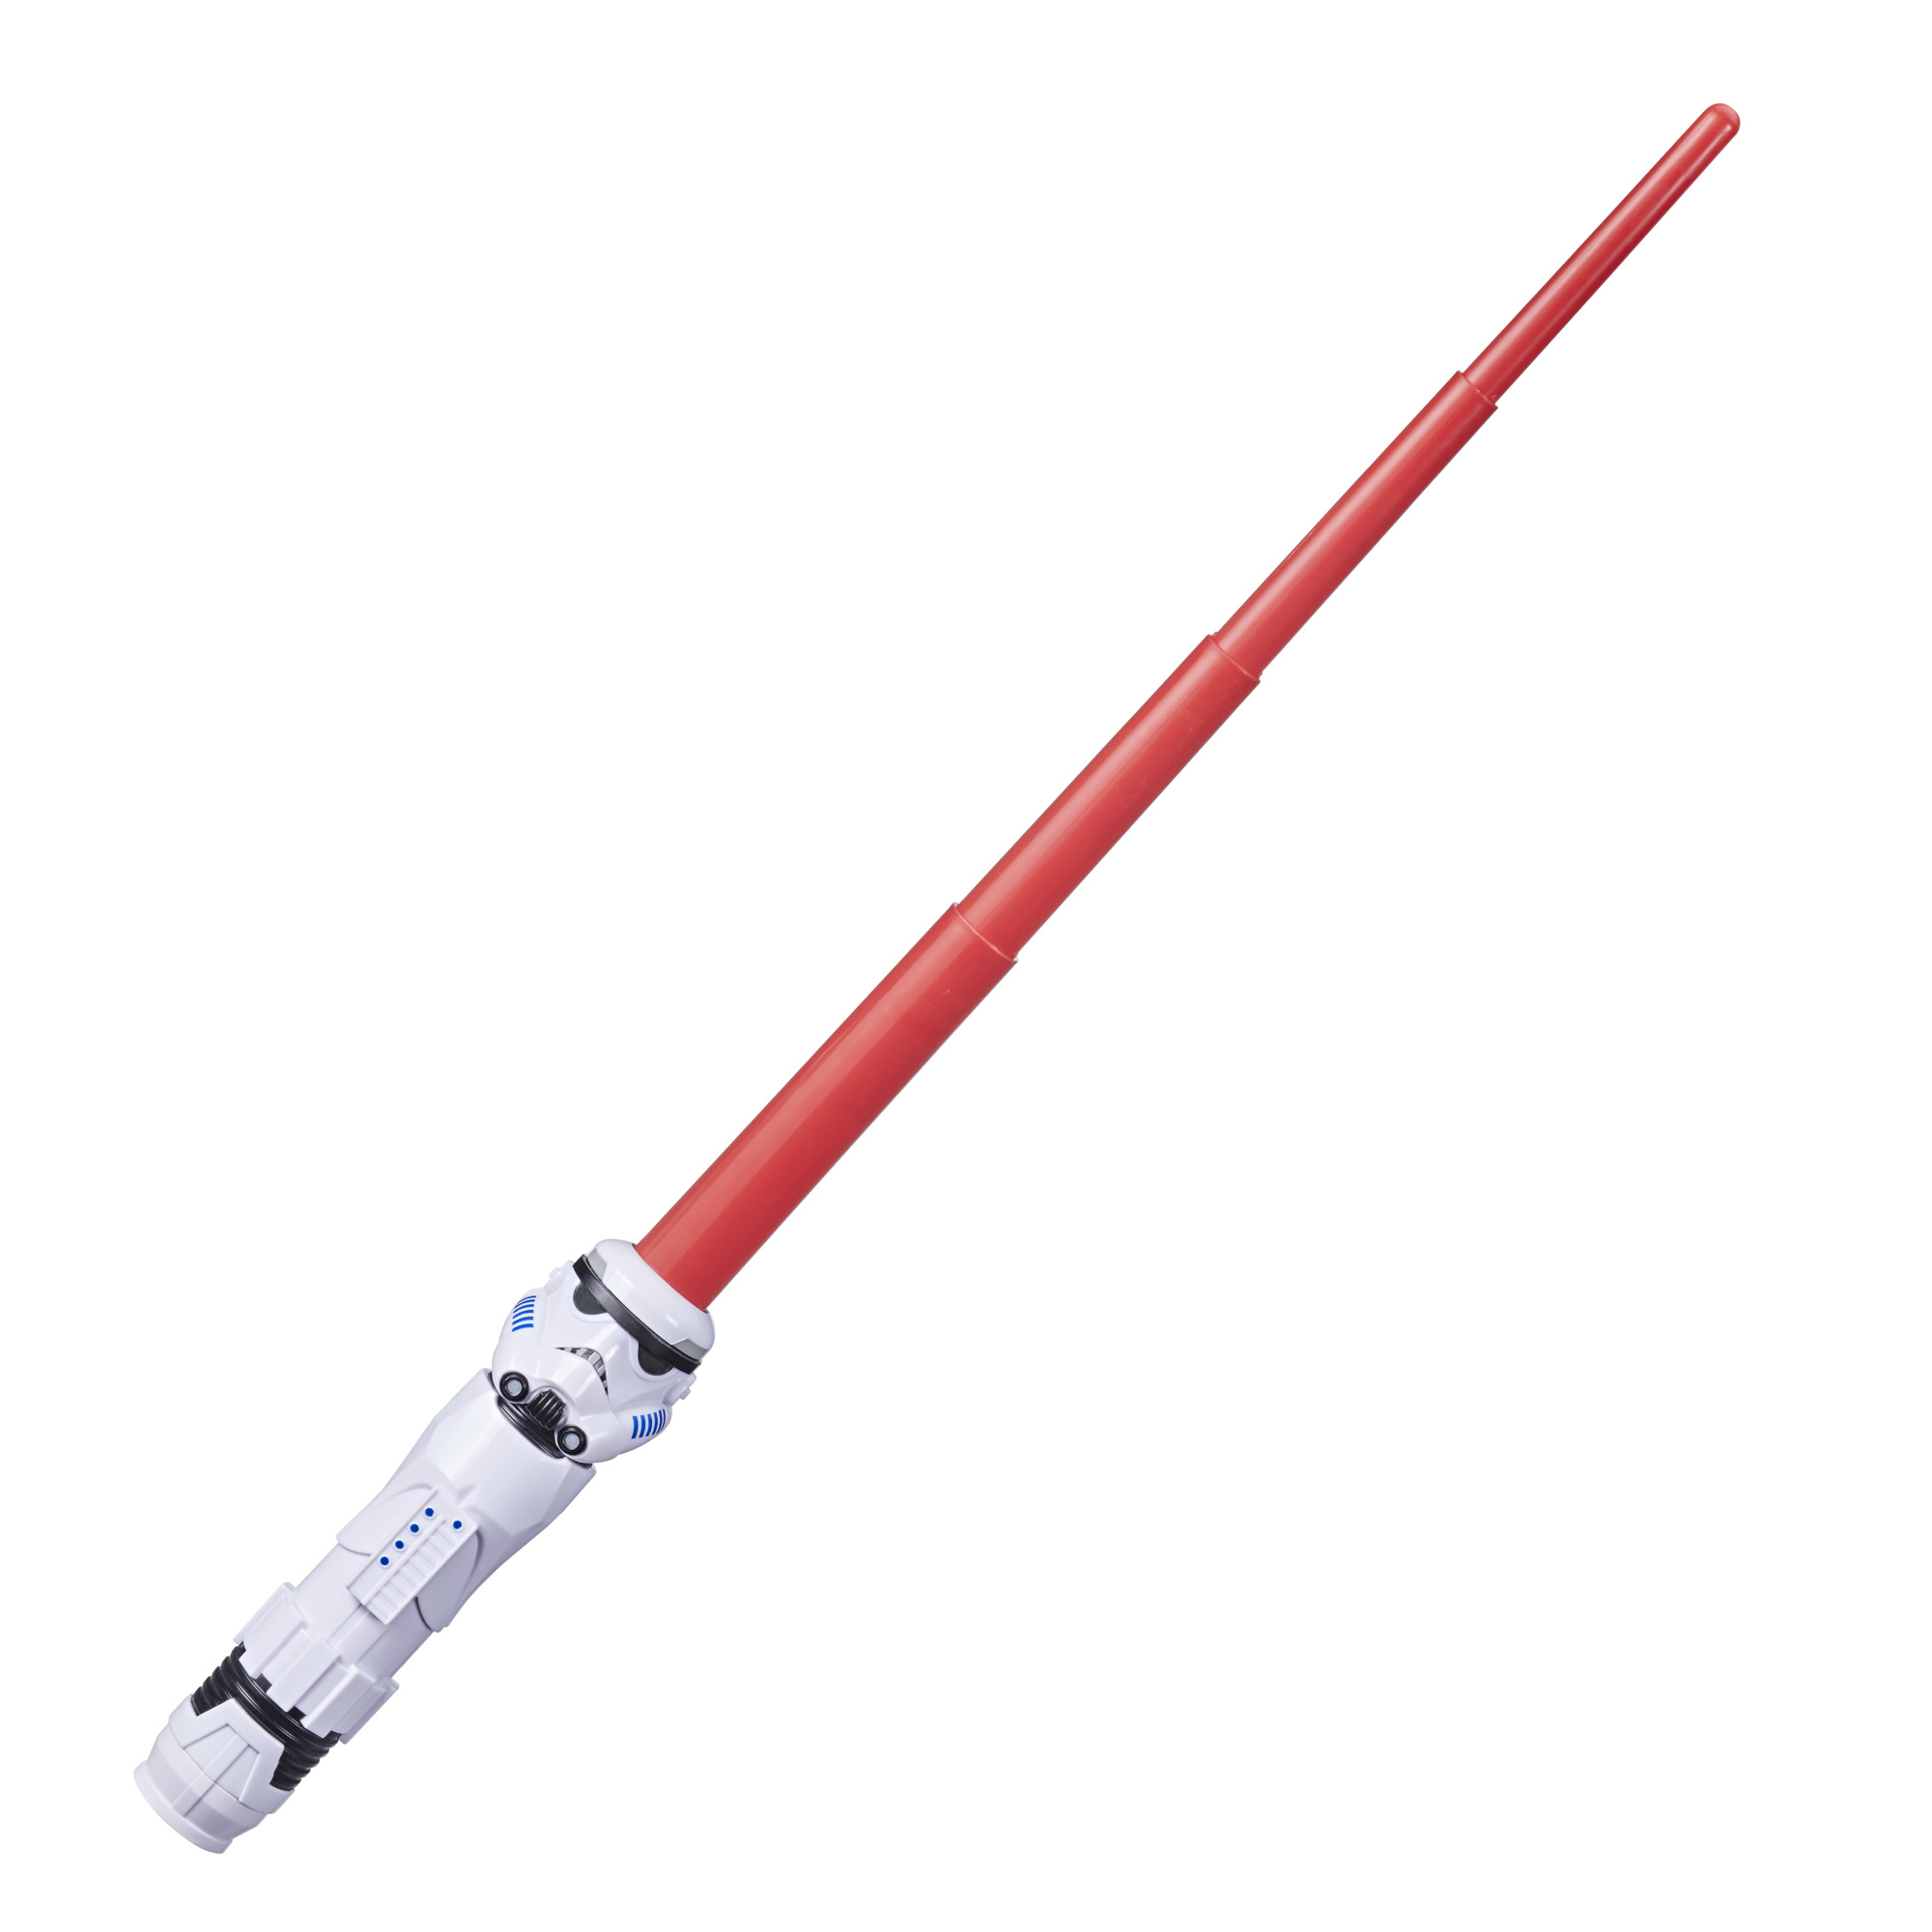 imageSW Imperial Stormtrooper Lightsaber Squad Lightsaber Toy 2